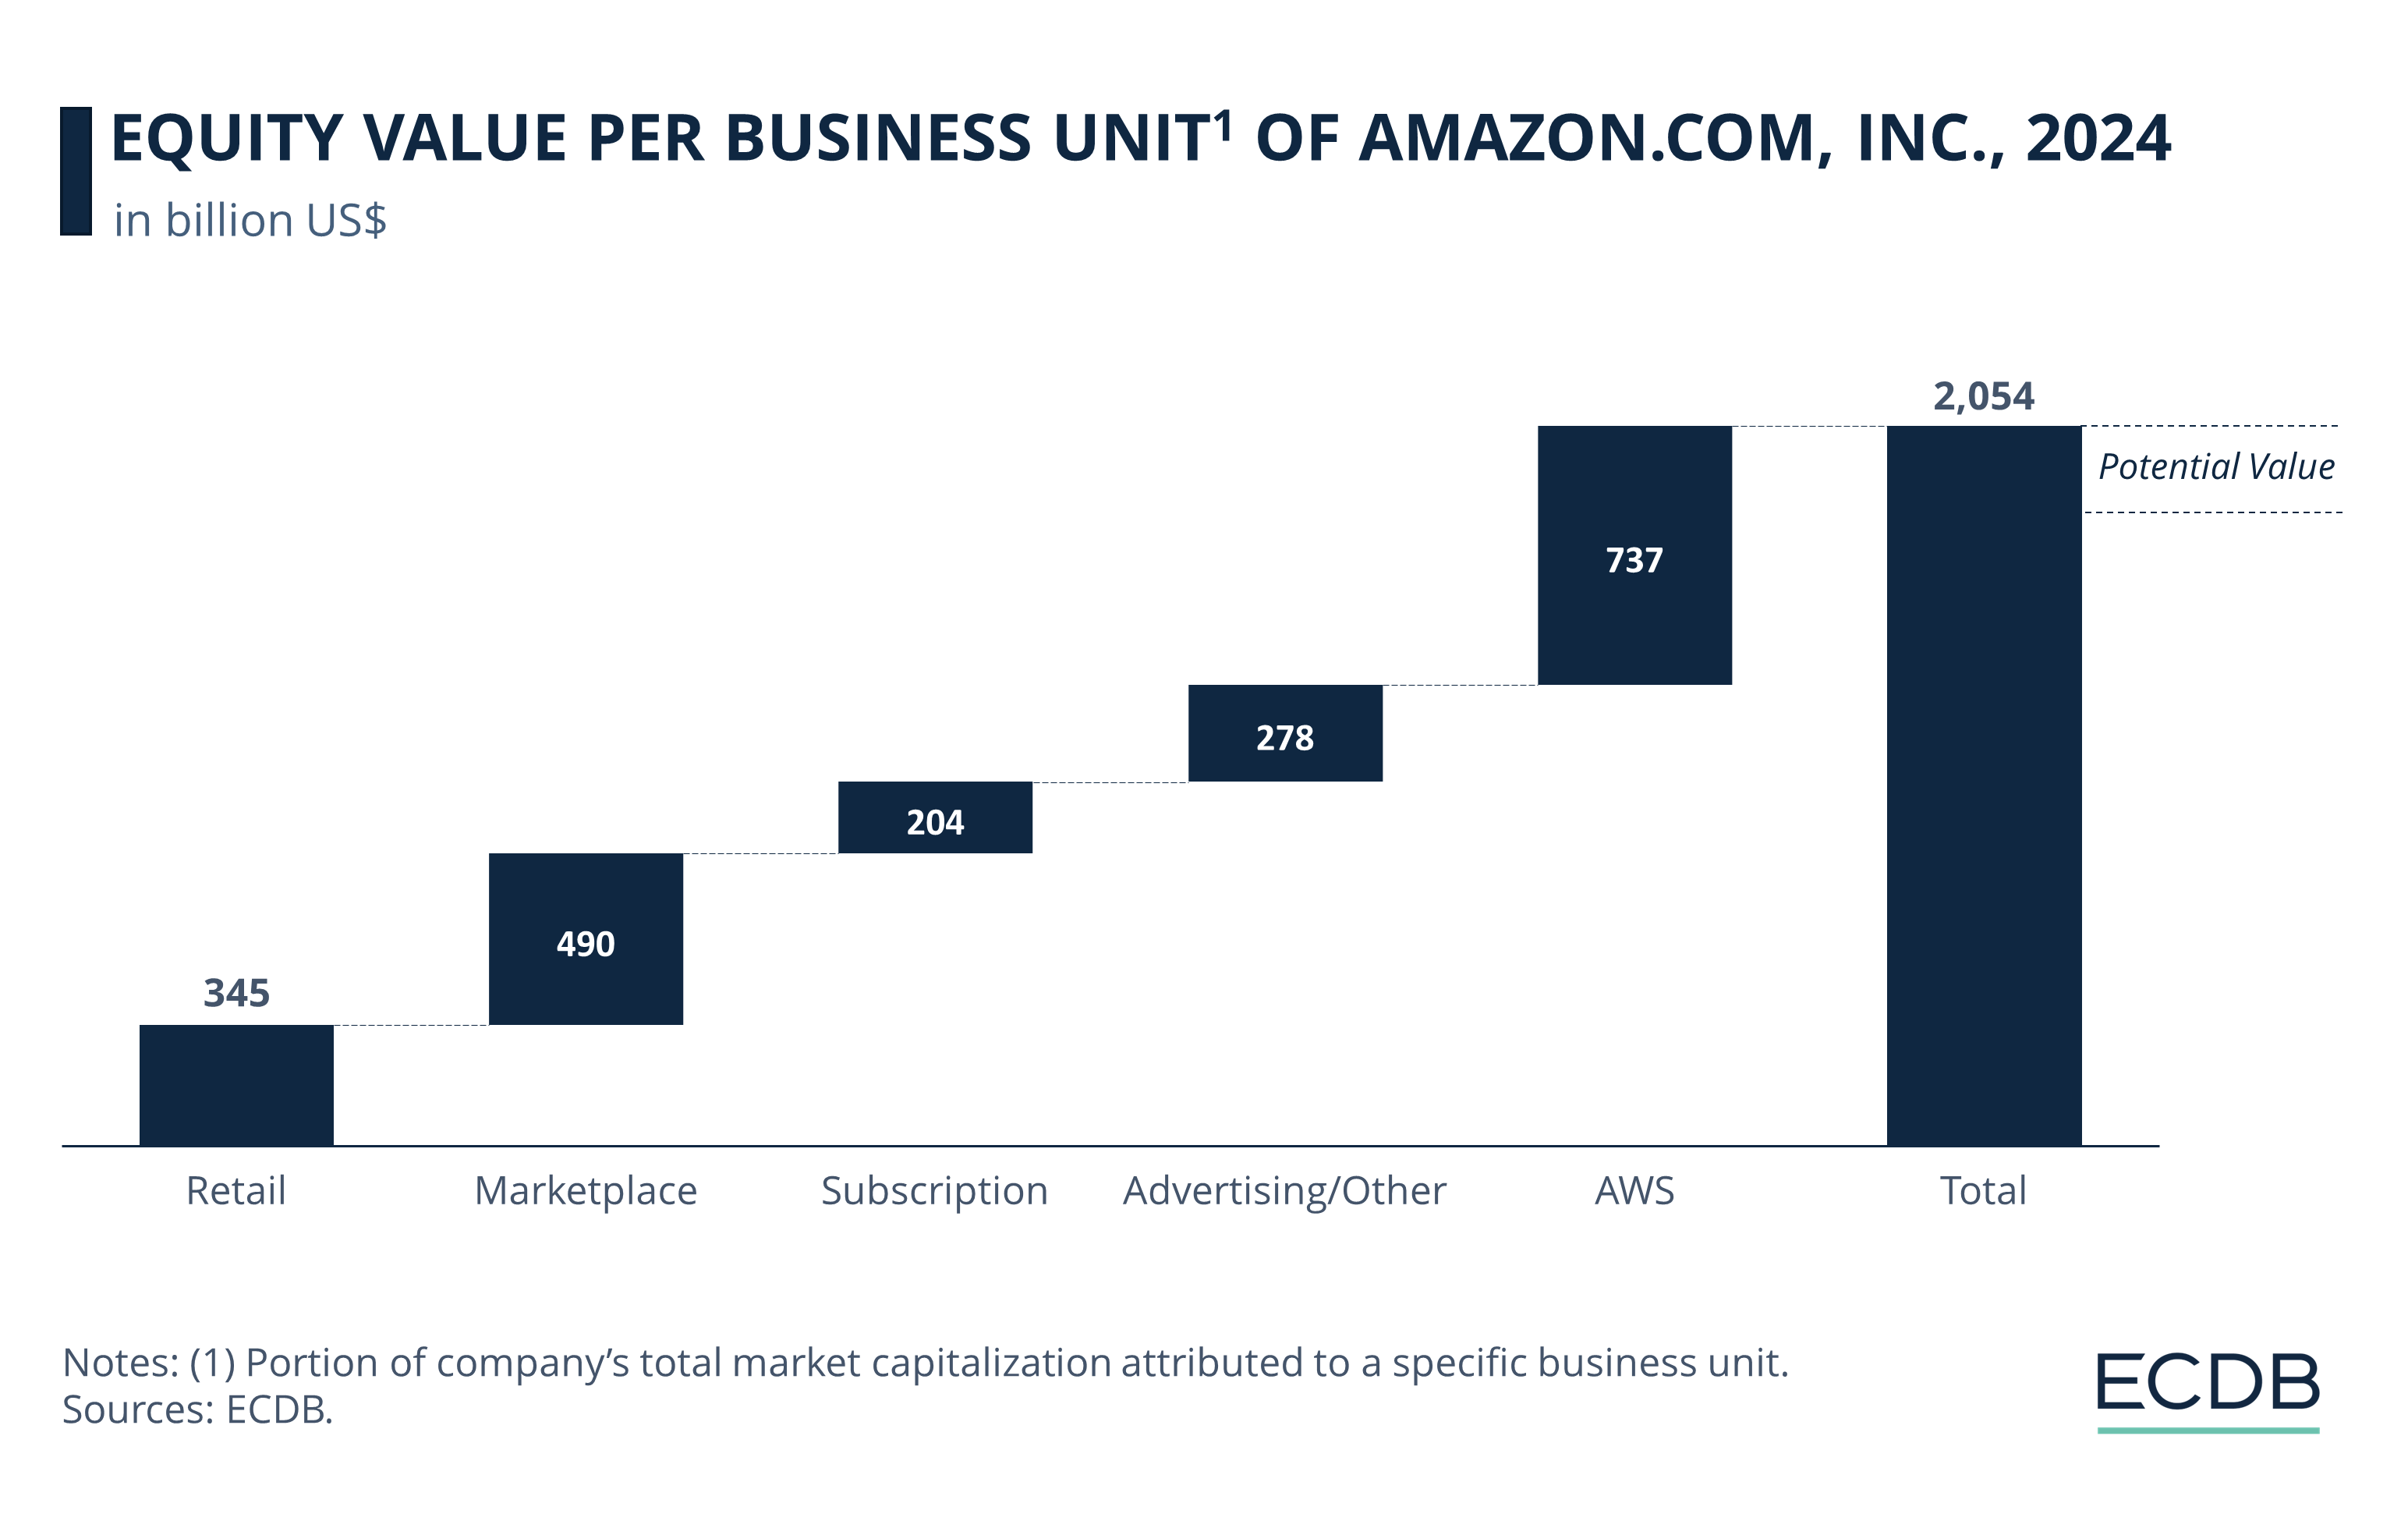 Equity Value per Business Unit of Amazon, 2024